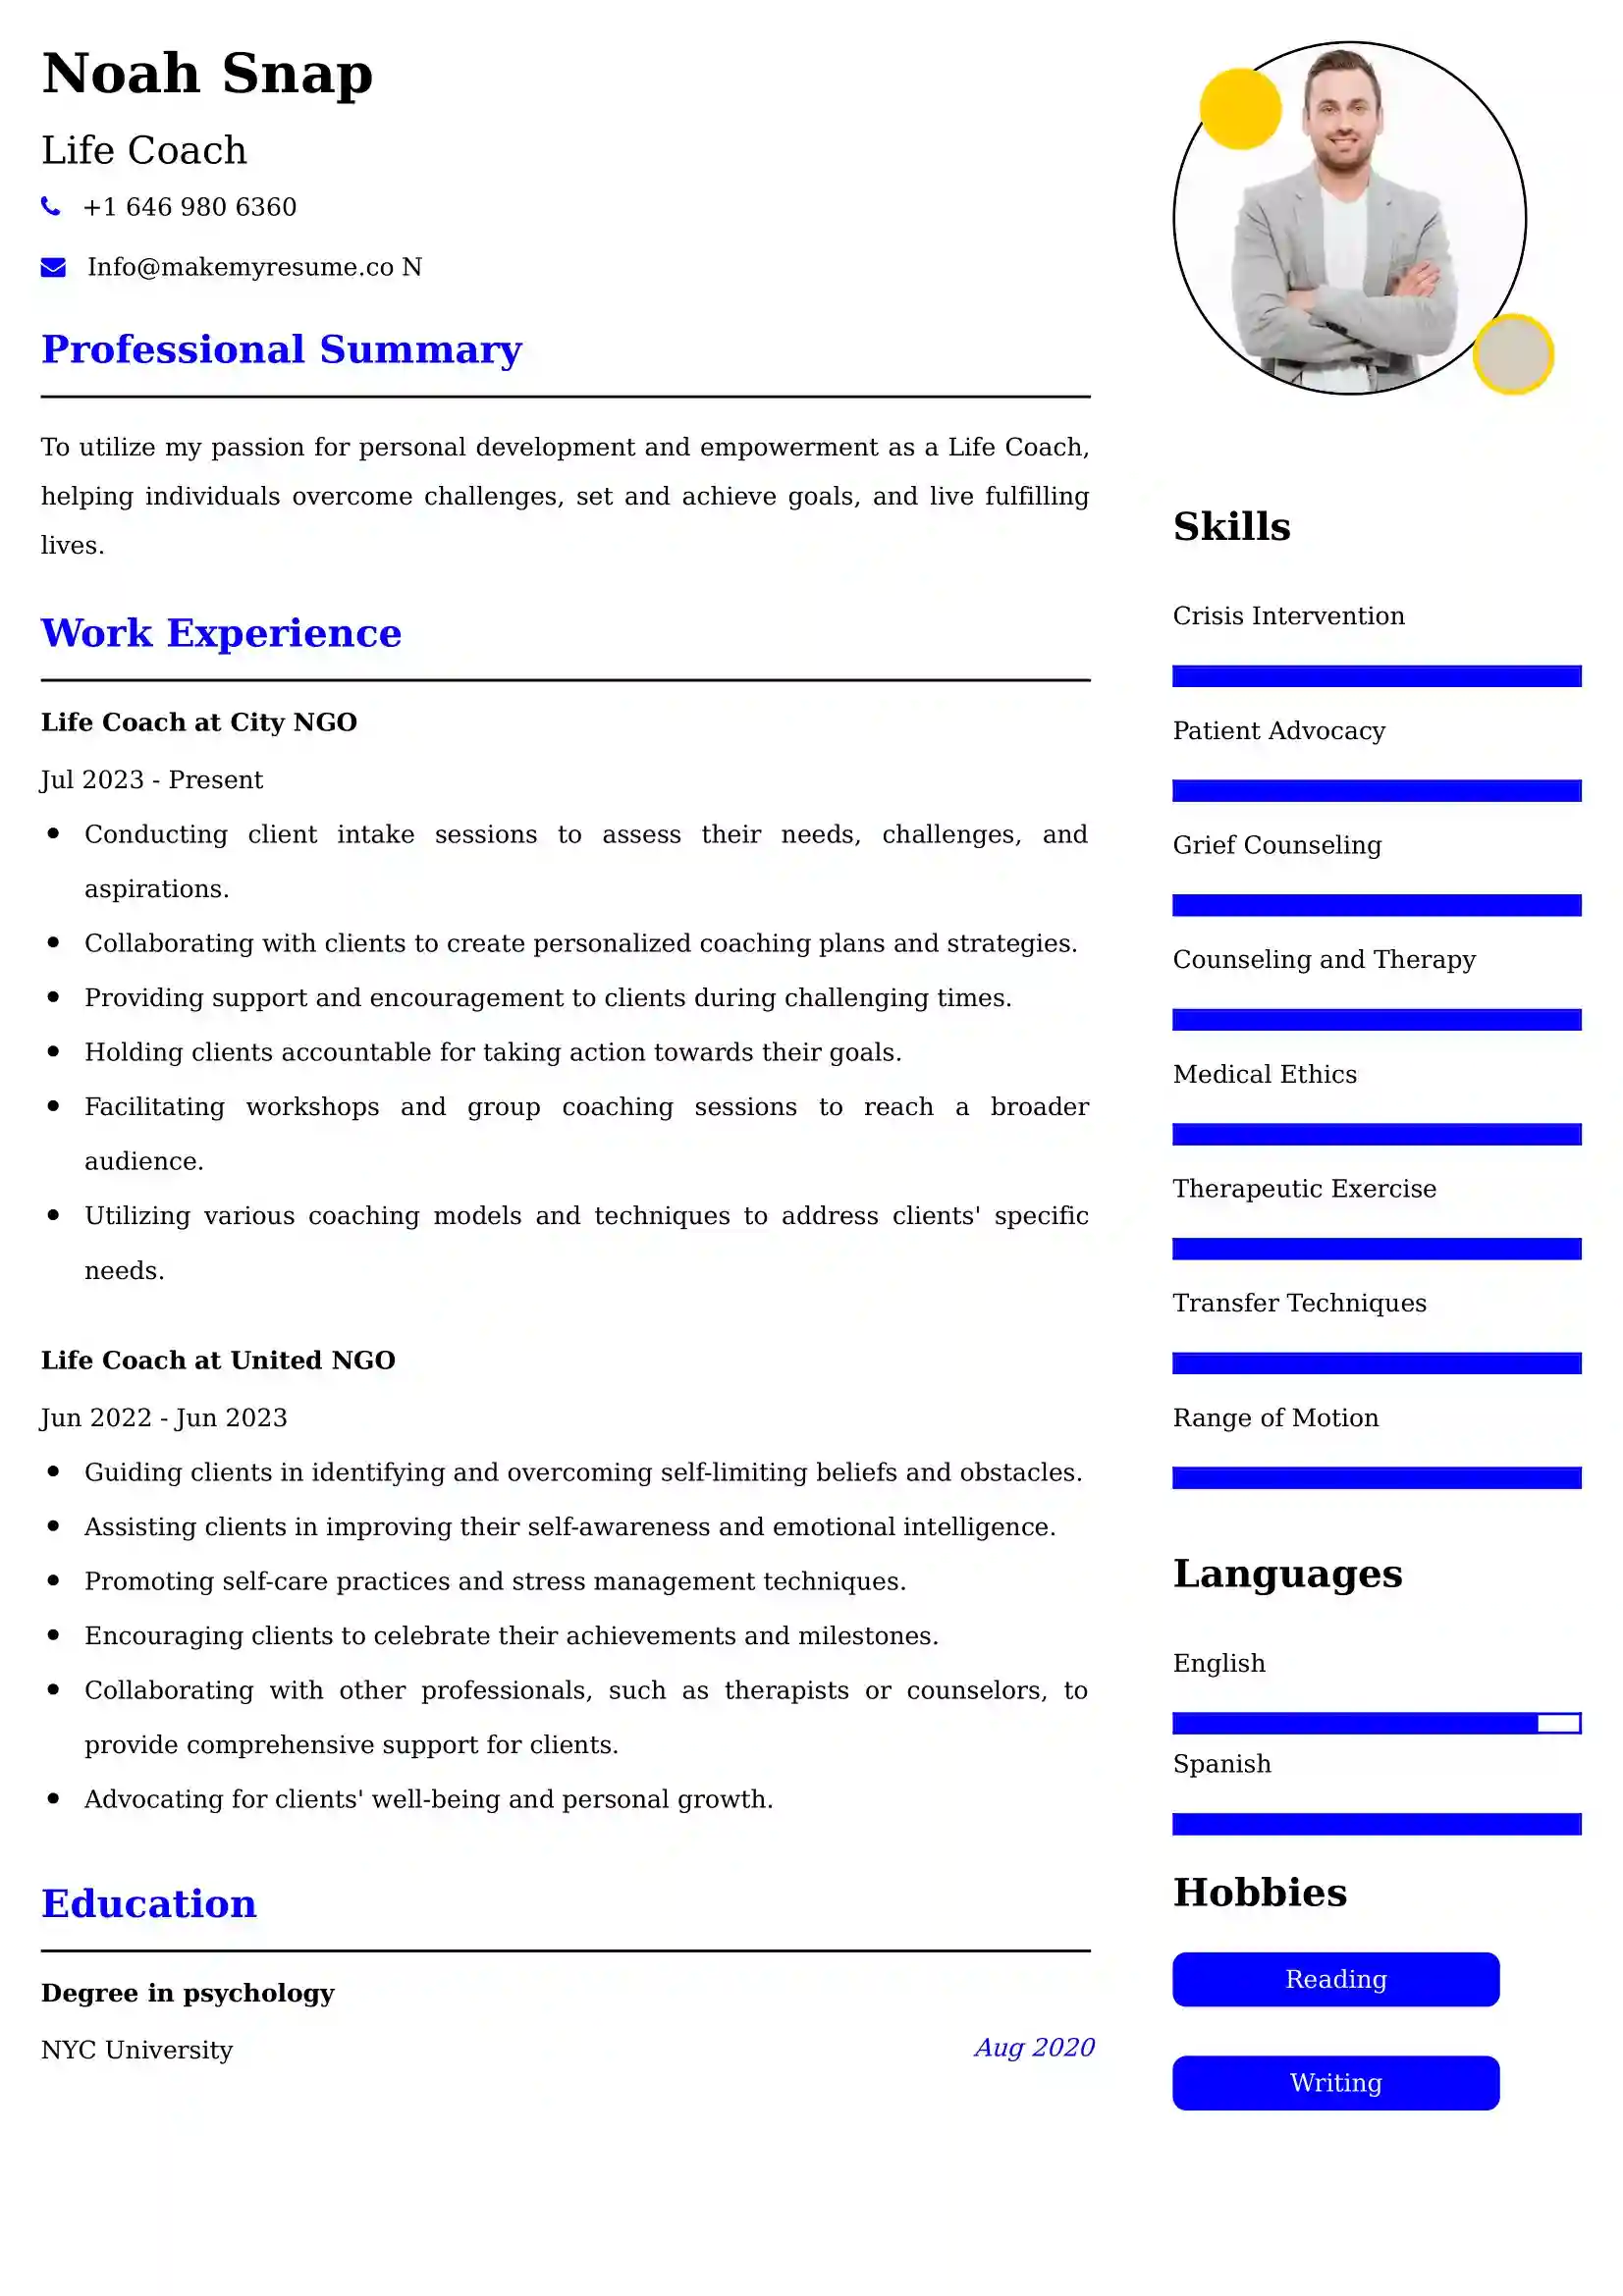 Life Coach Resume Examples - Australian Format and Tips